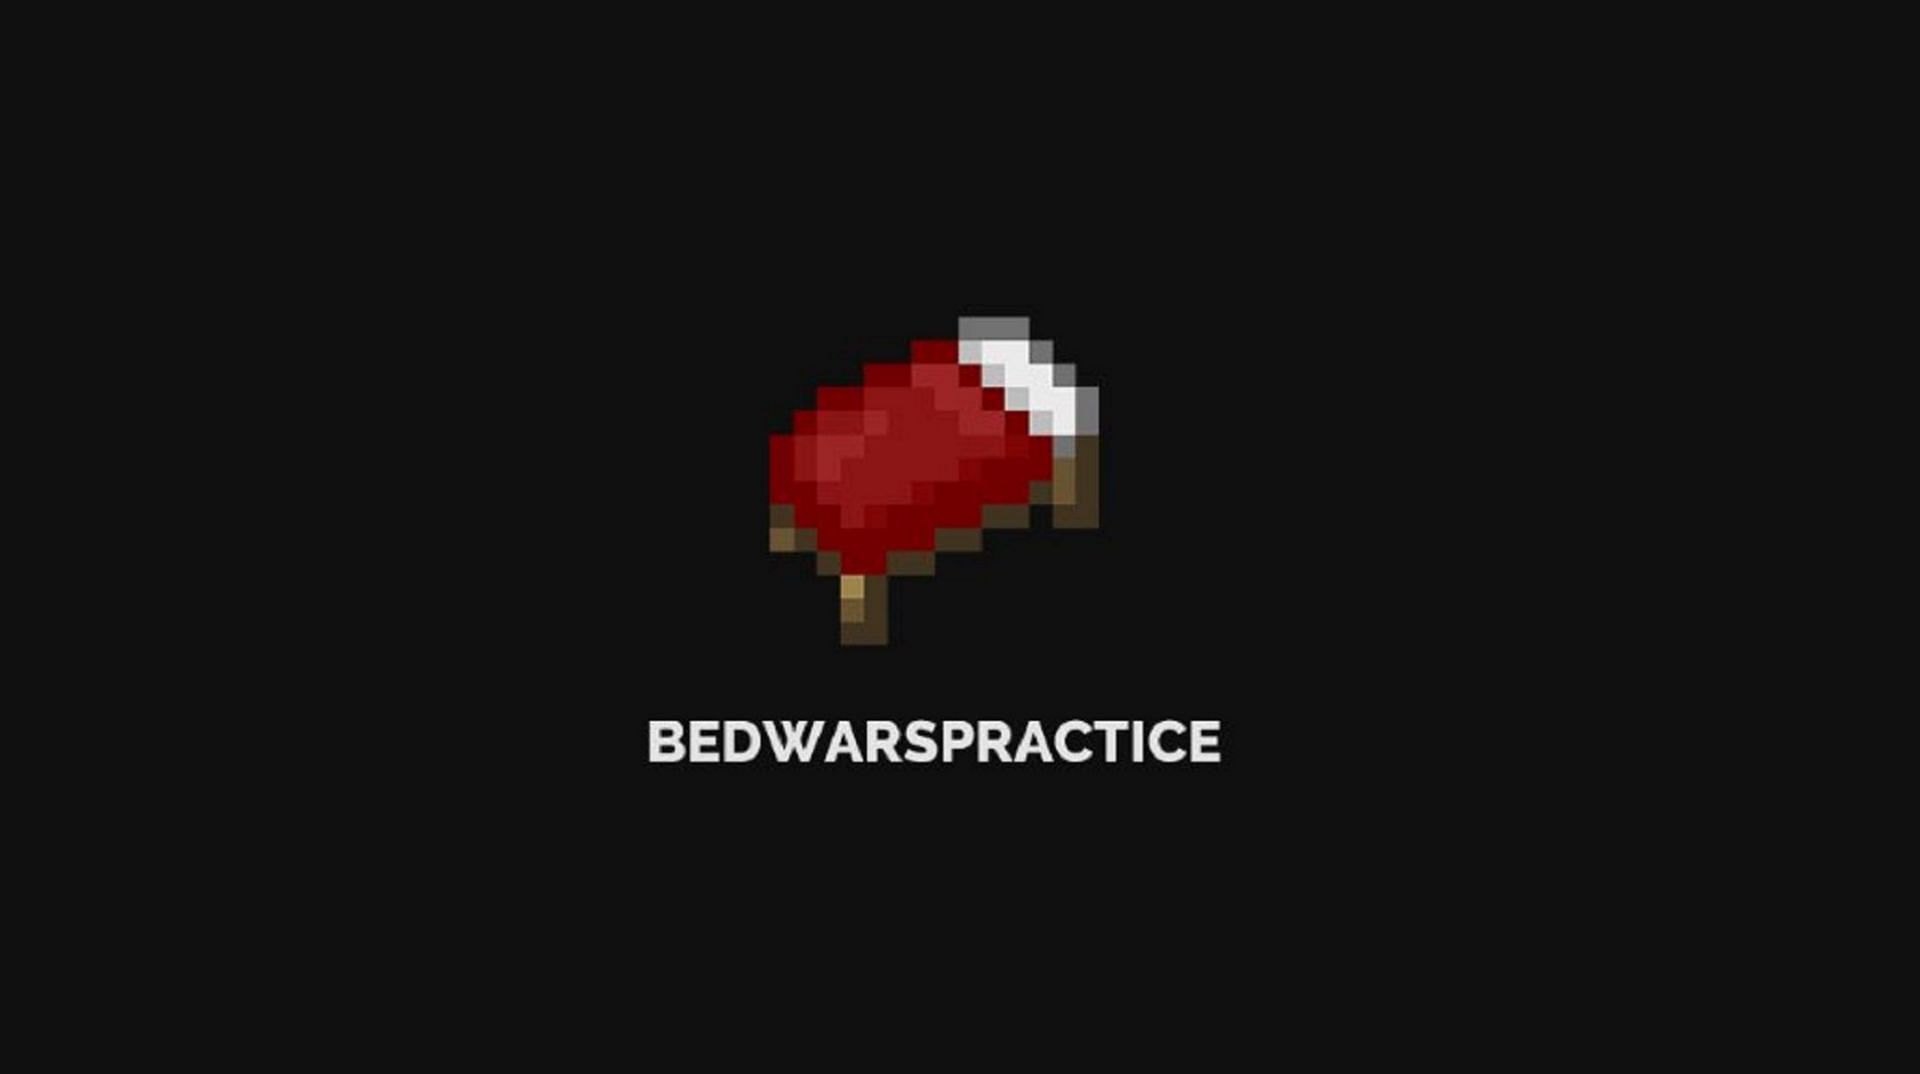 Bedwars Practice offers exactly what its title implies (Image via @BedwarsPractice/Twitter)